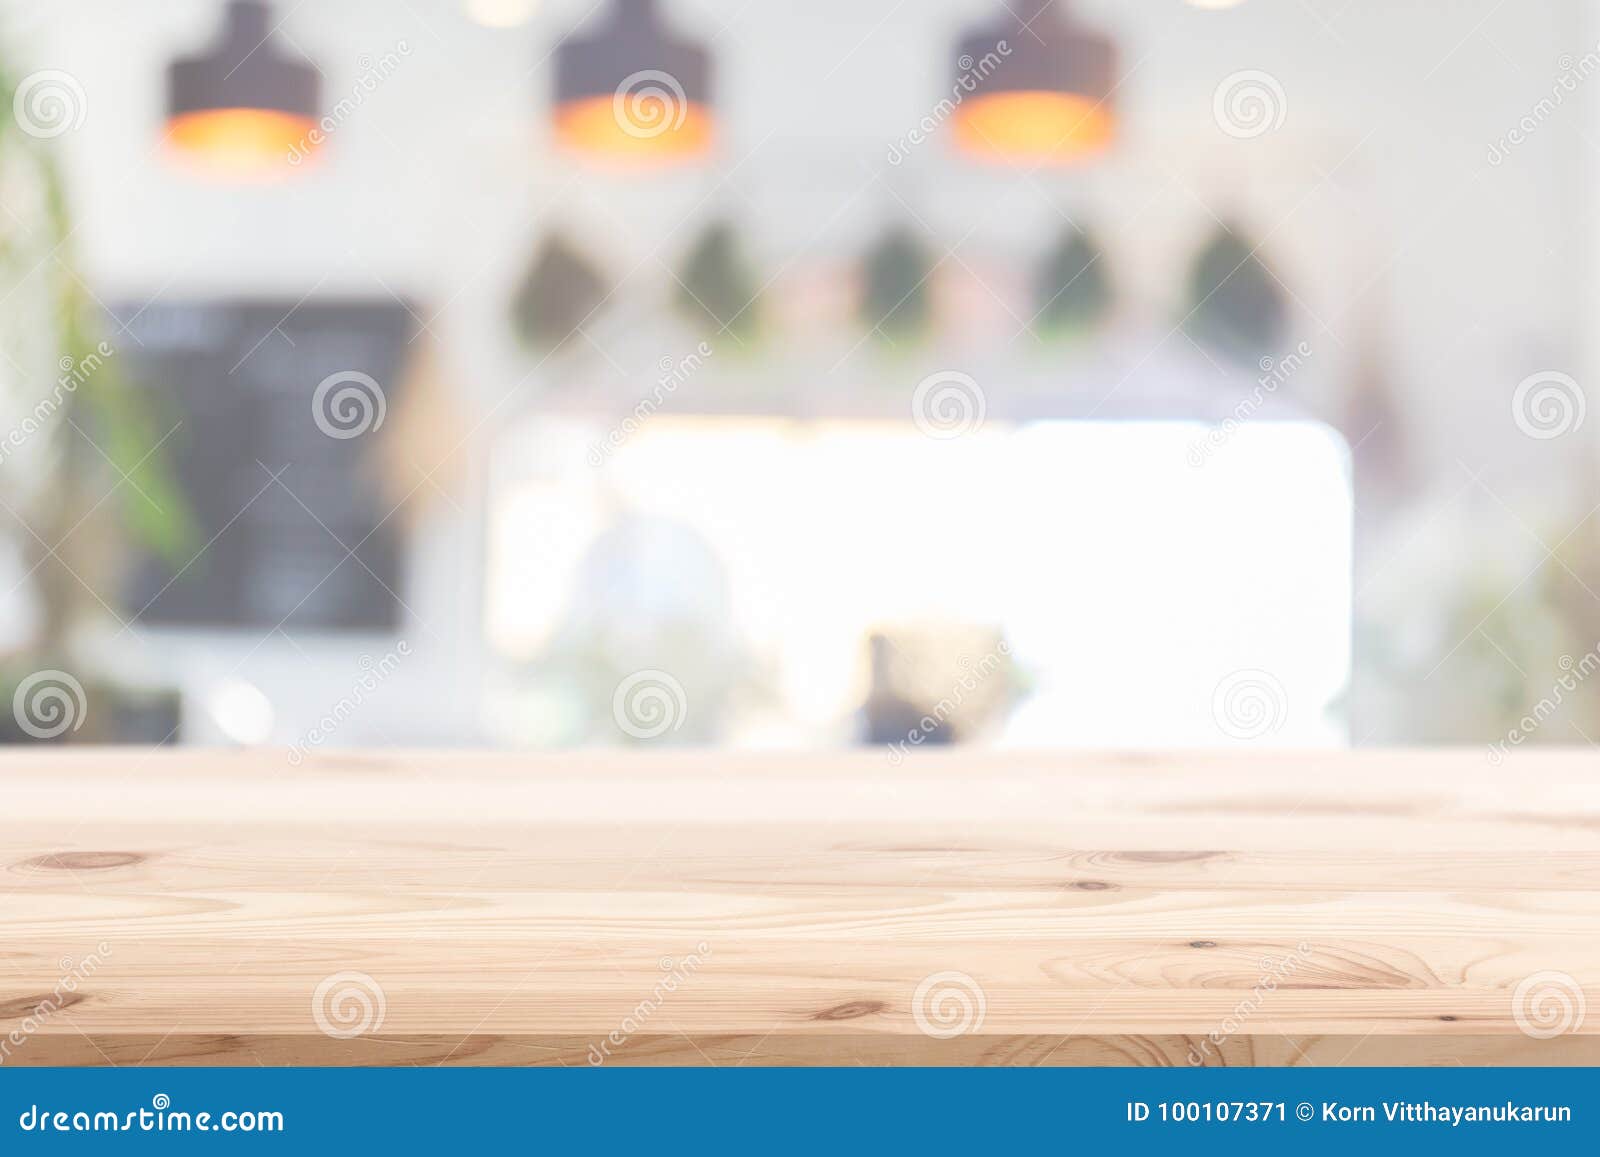 wood table foreground with blur home cafe kitchen background